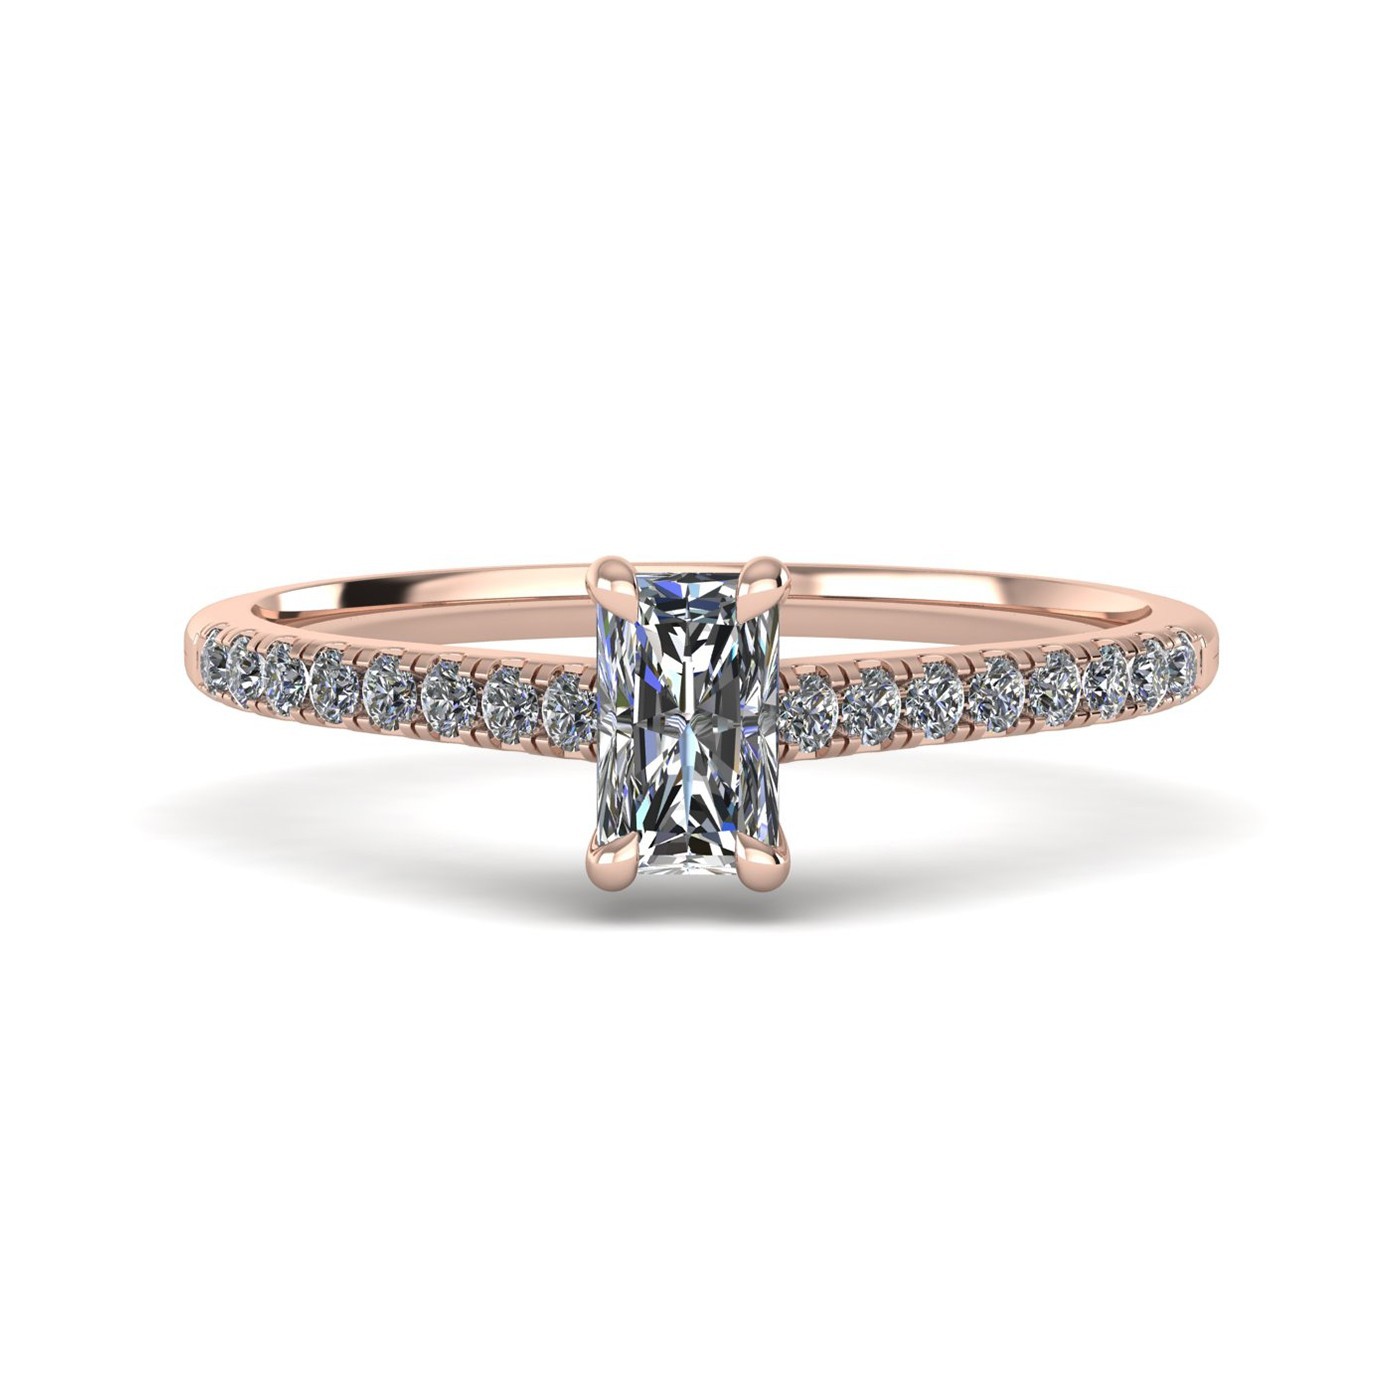 18k rose gold  0,50 ct 4 prongs radiant cut diamond engagement ring with whisper thin pavÉ set band Photos & images